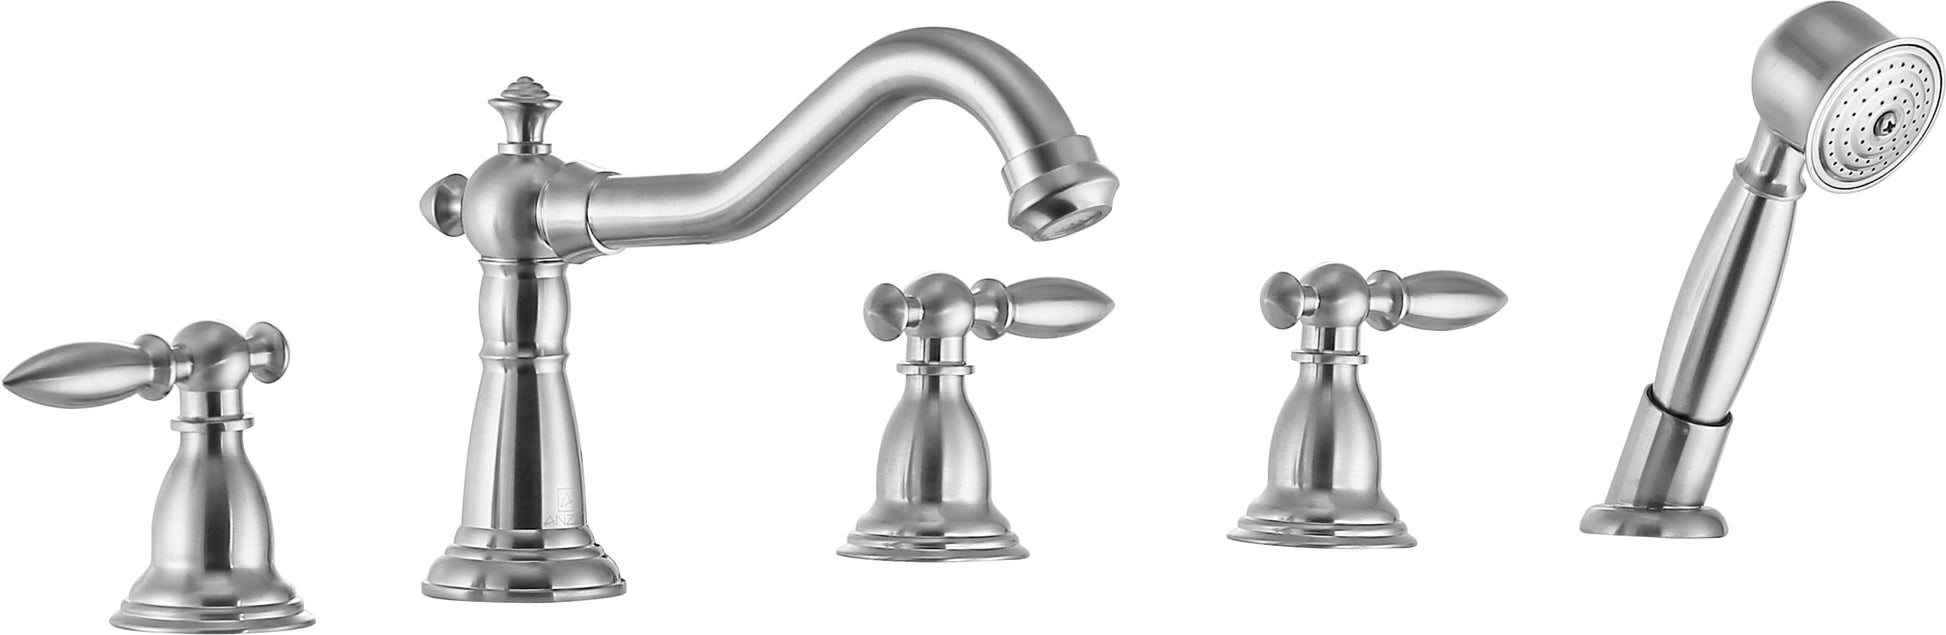 FR-AZ091BN - Patriarch 2-Handle Deck-Mount Roman Tub Faucet with Handheld Sprayer in Brushed Nickel